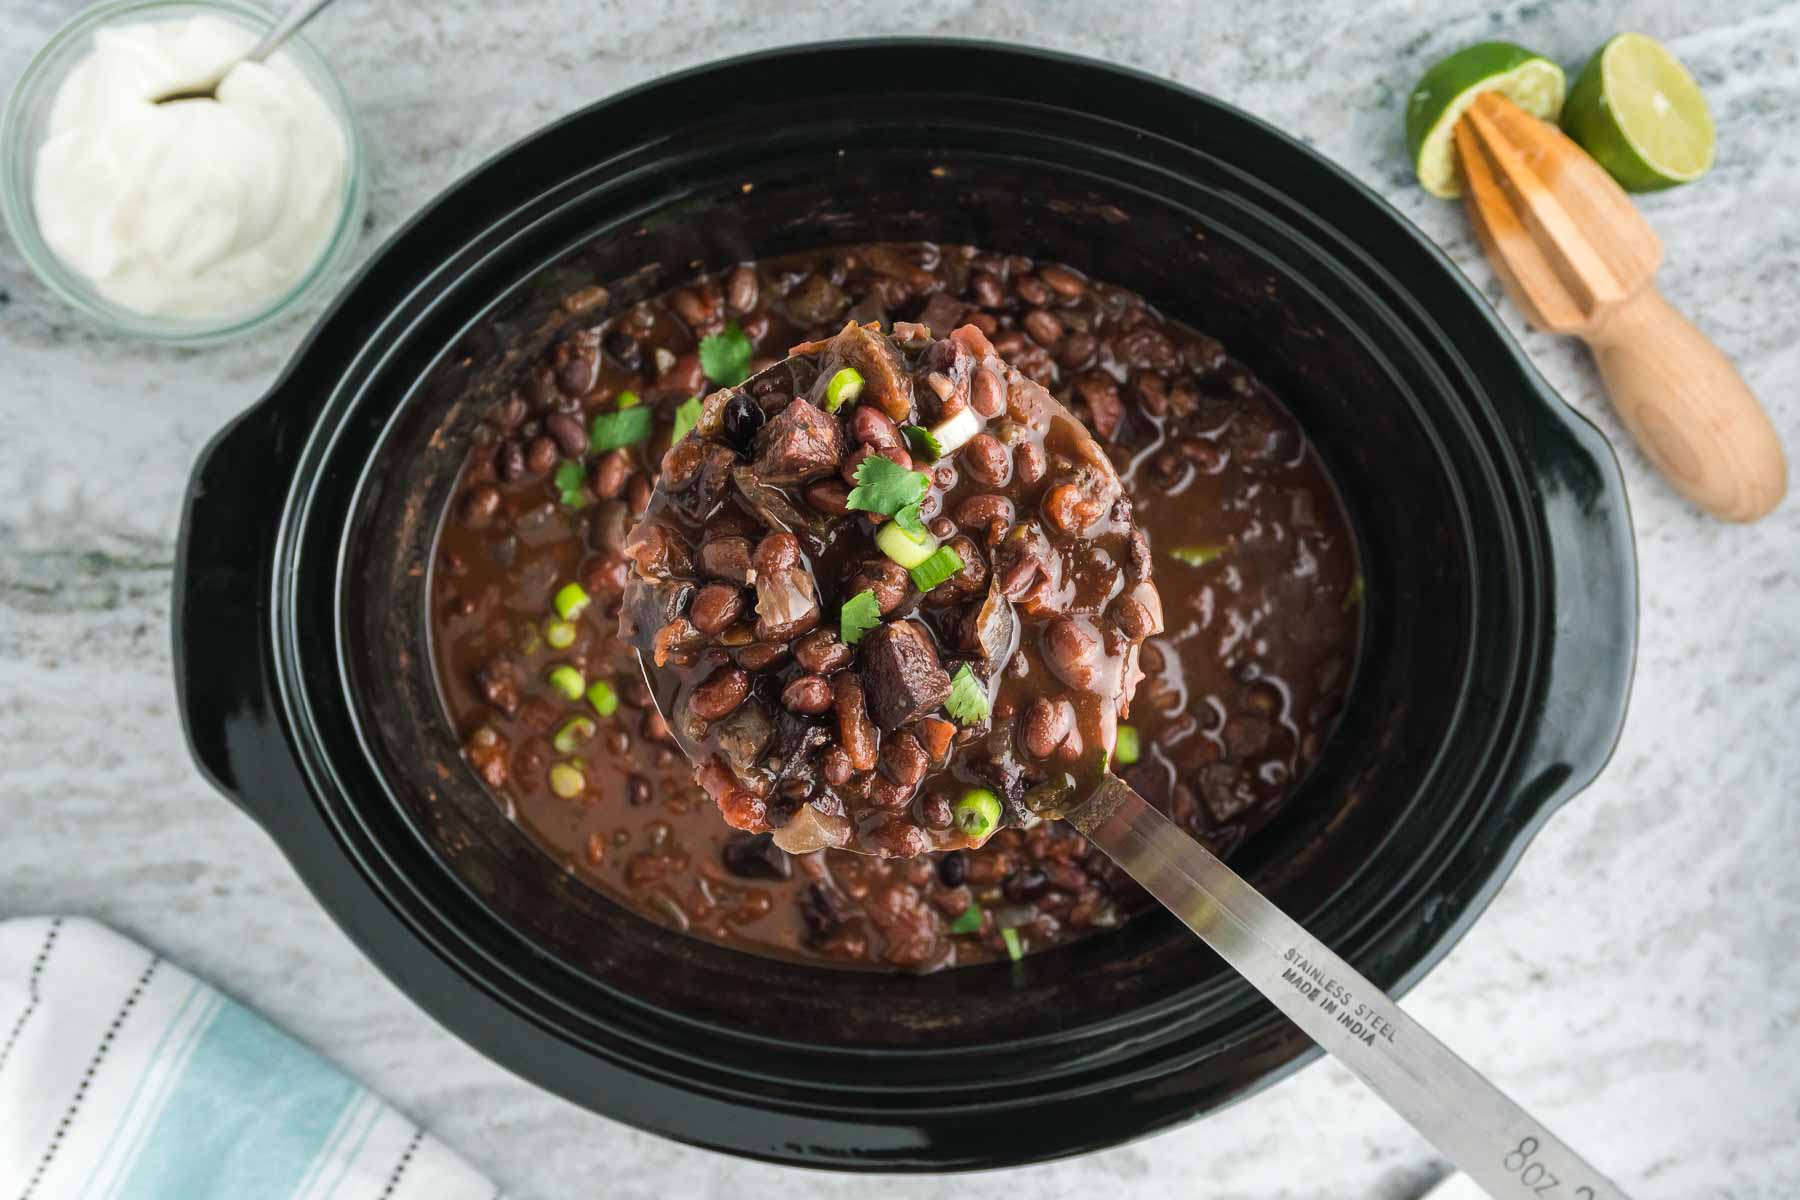 Metal spoon removing a scoop of slow cooker black bean soup from a black crock pot.